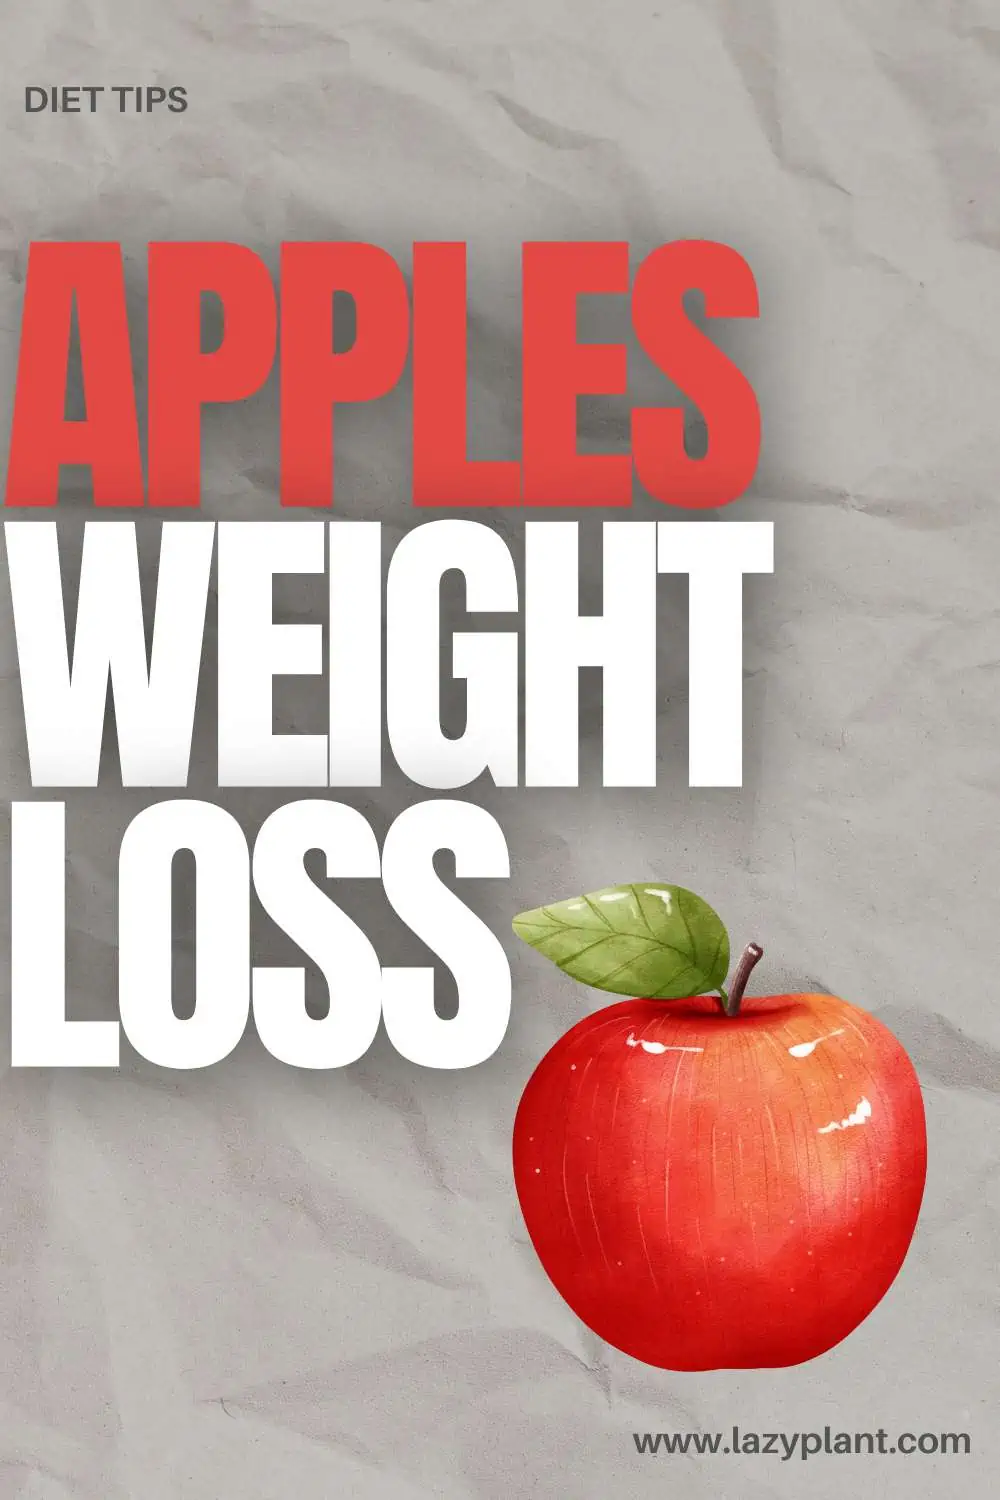 Eat apples for Weight Loss.